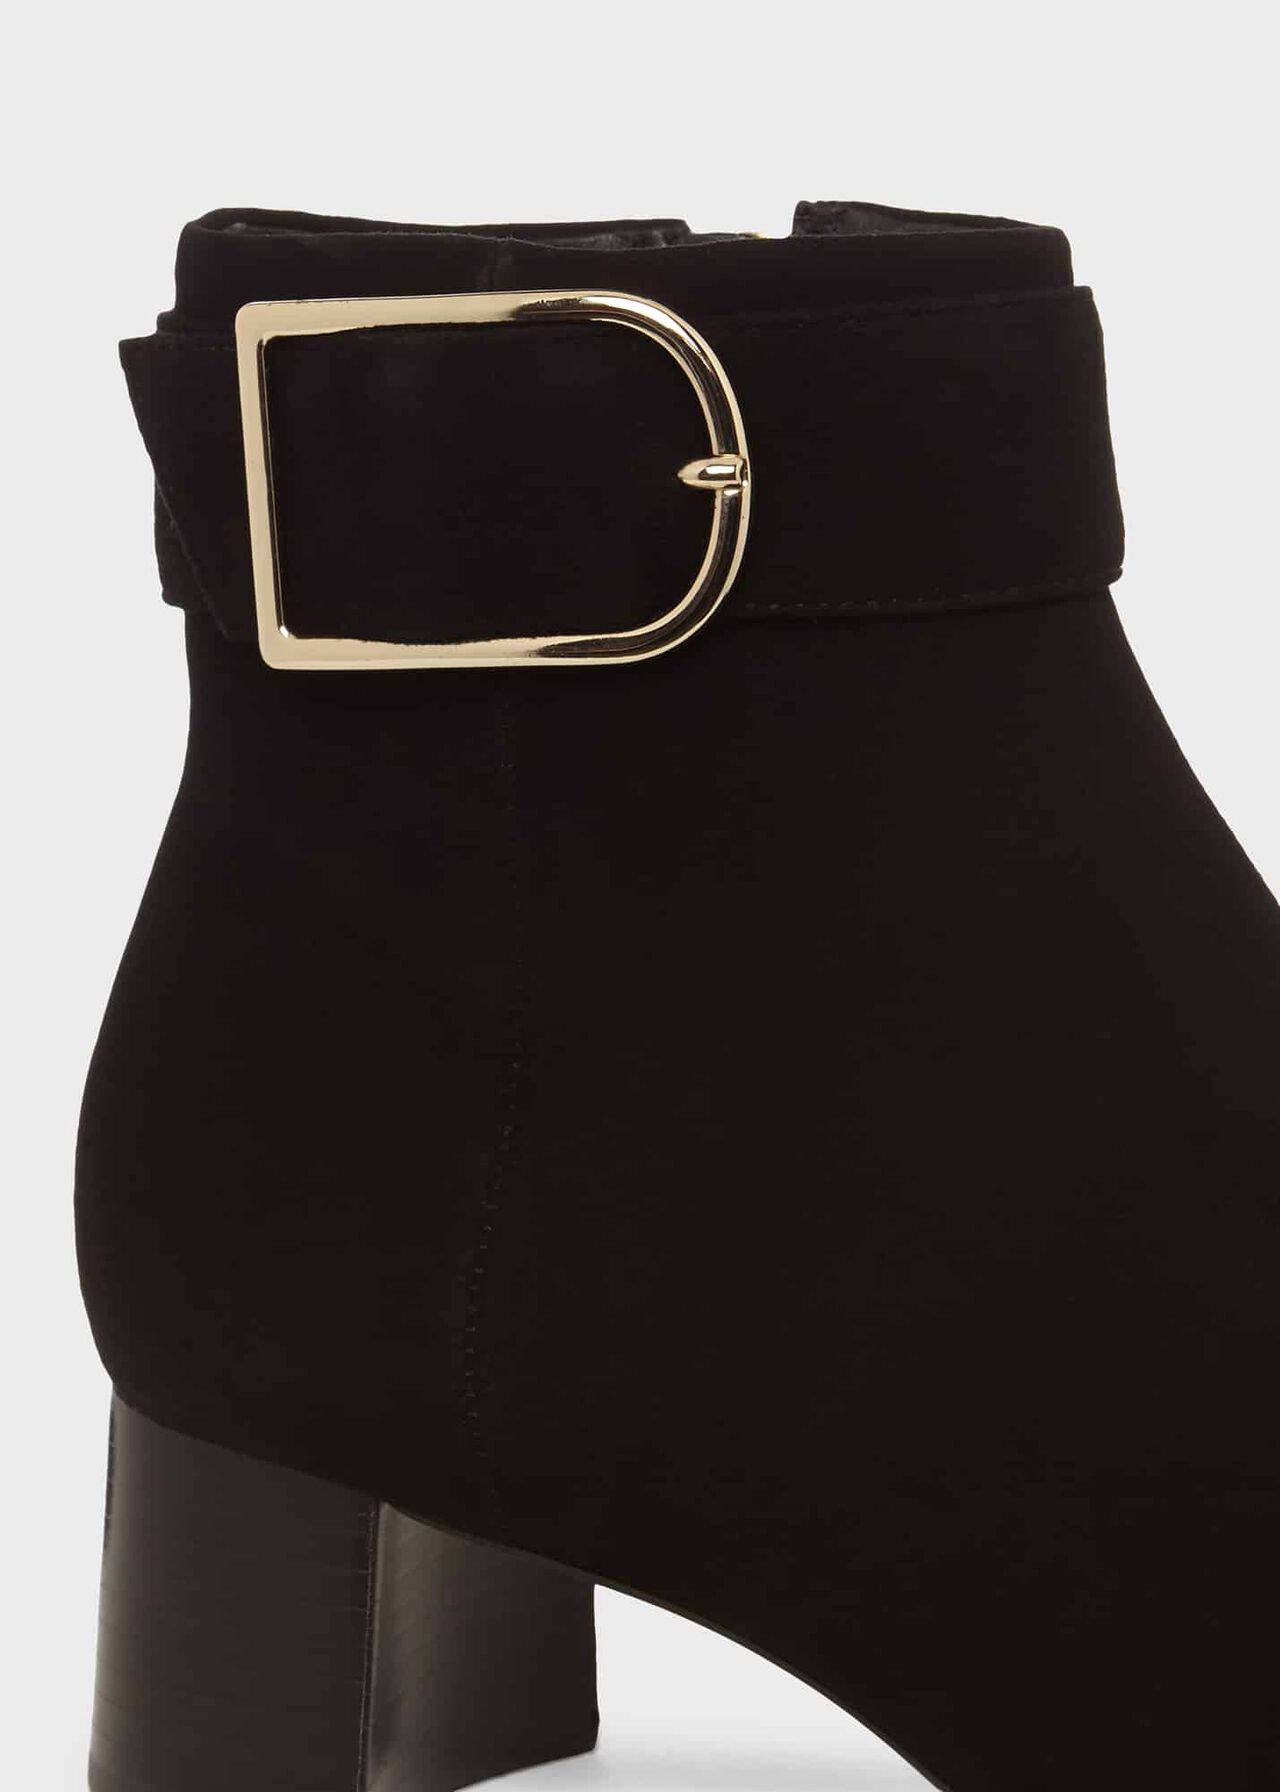 Suzannah Ankle Boots, Black, hi-res